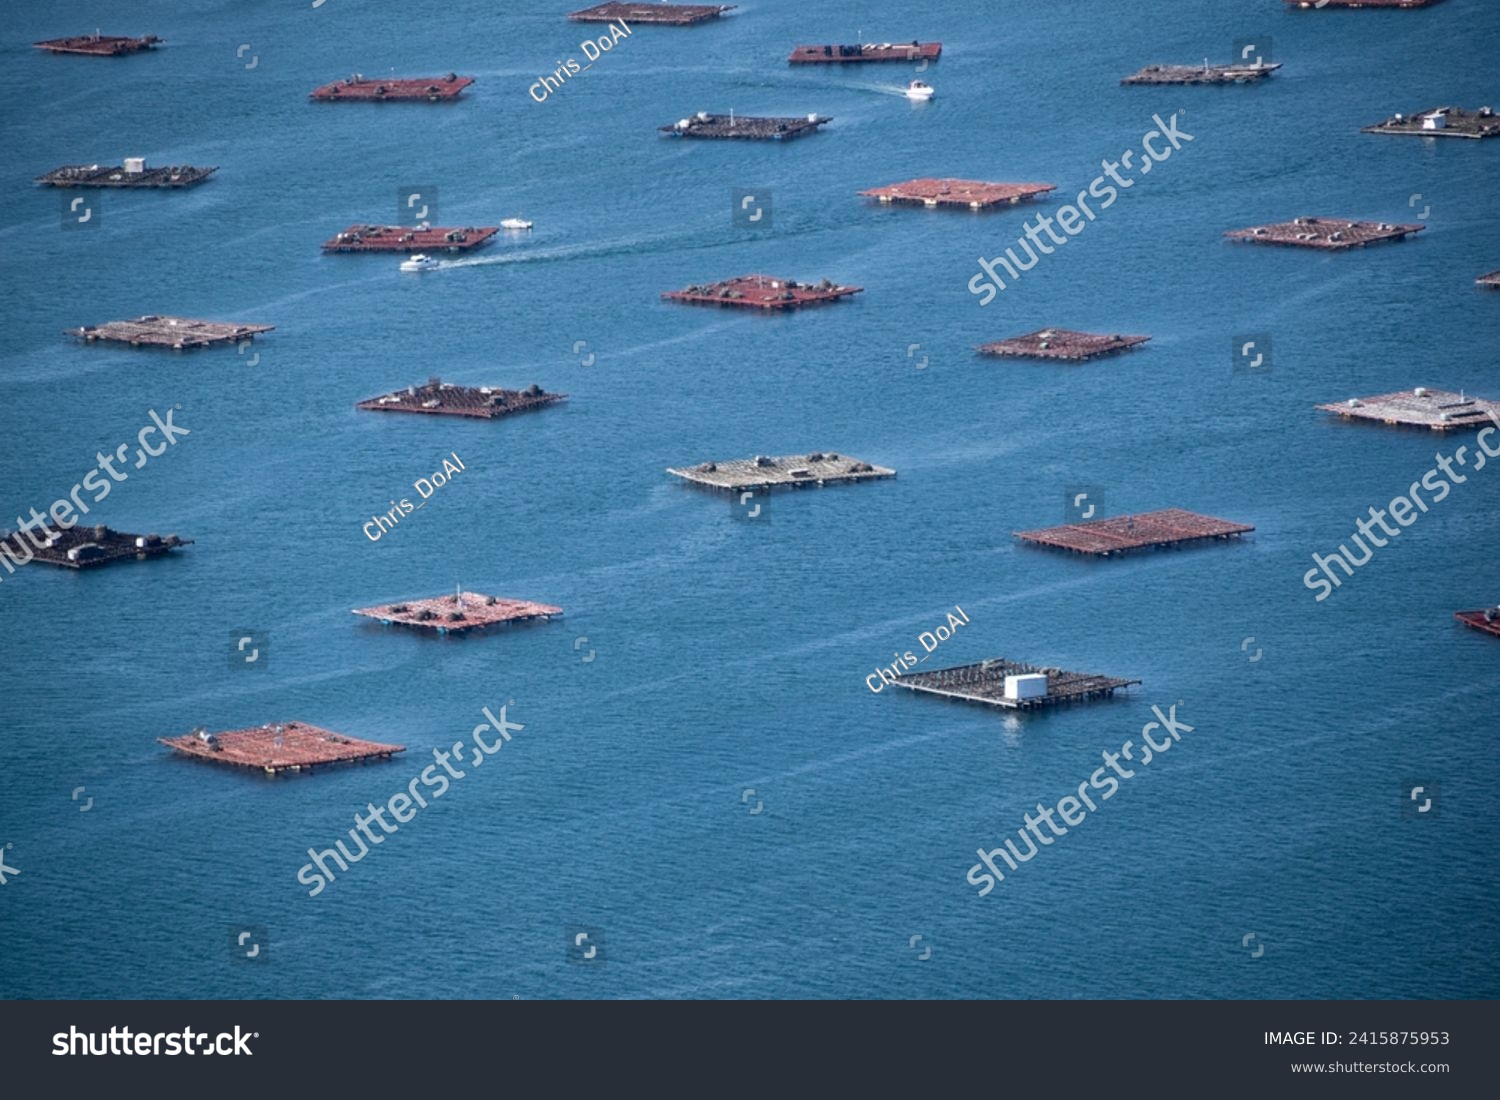 Aerial view of the mussels aquaculture rafts in Galicia - Spain #2415875953